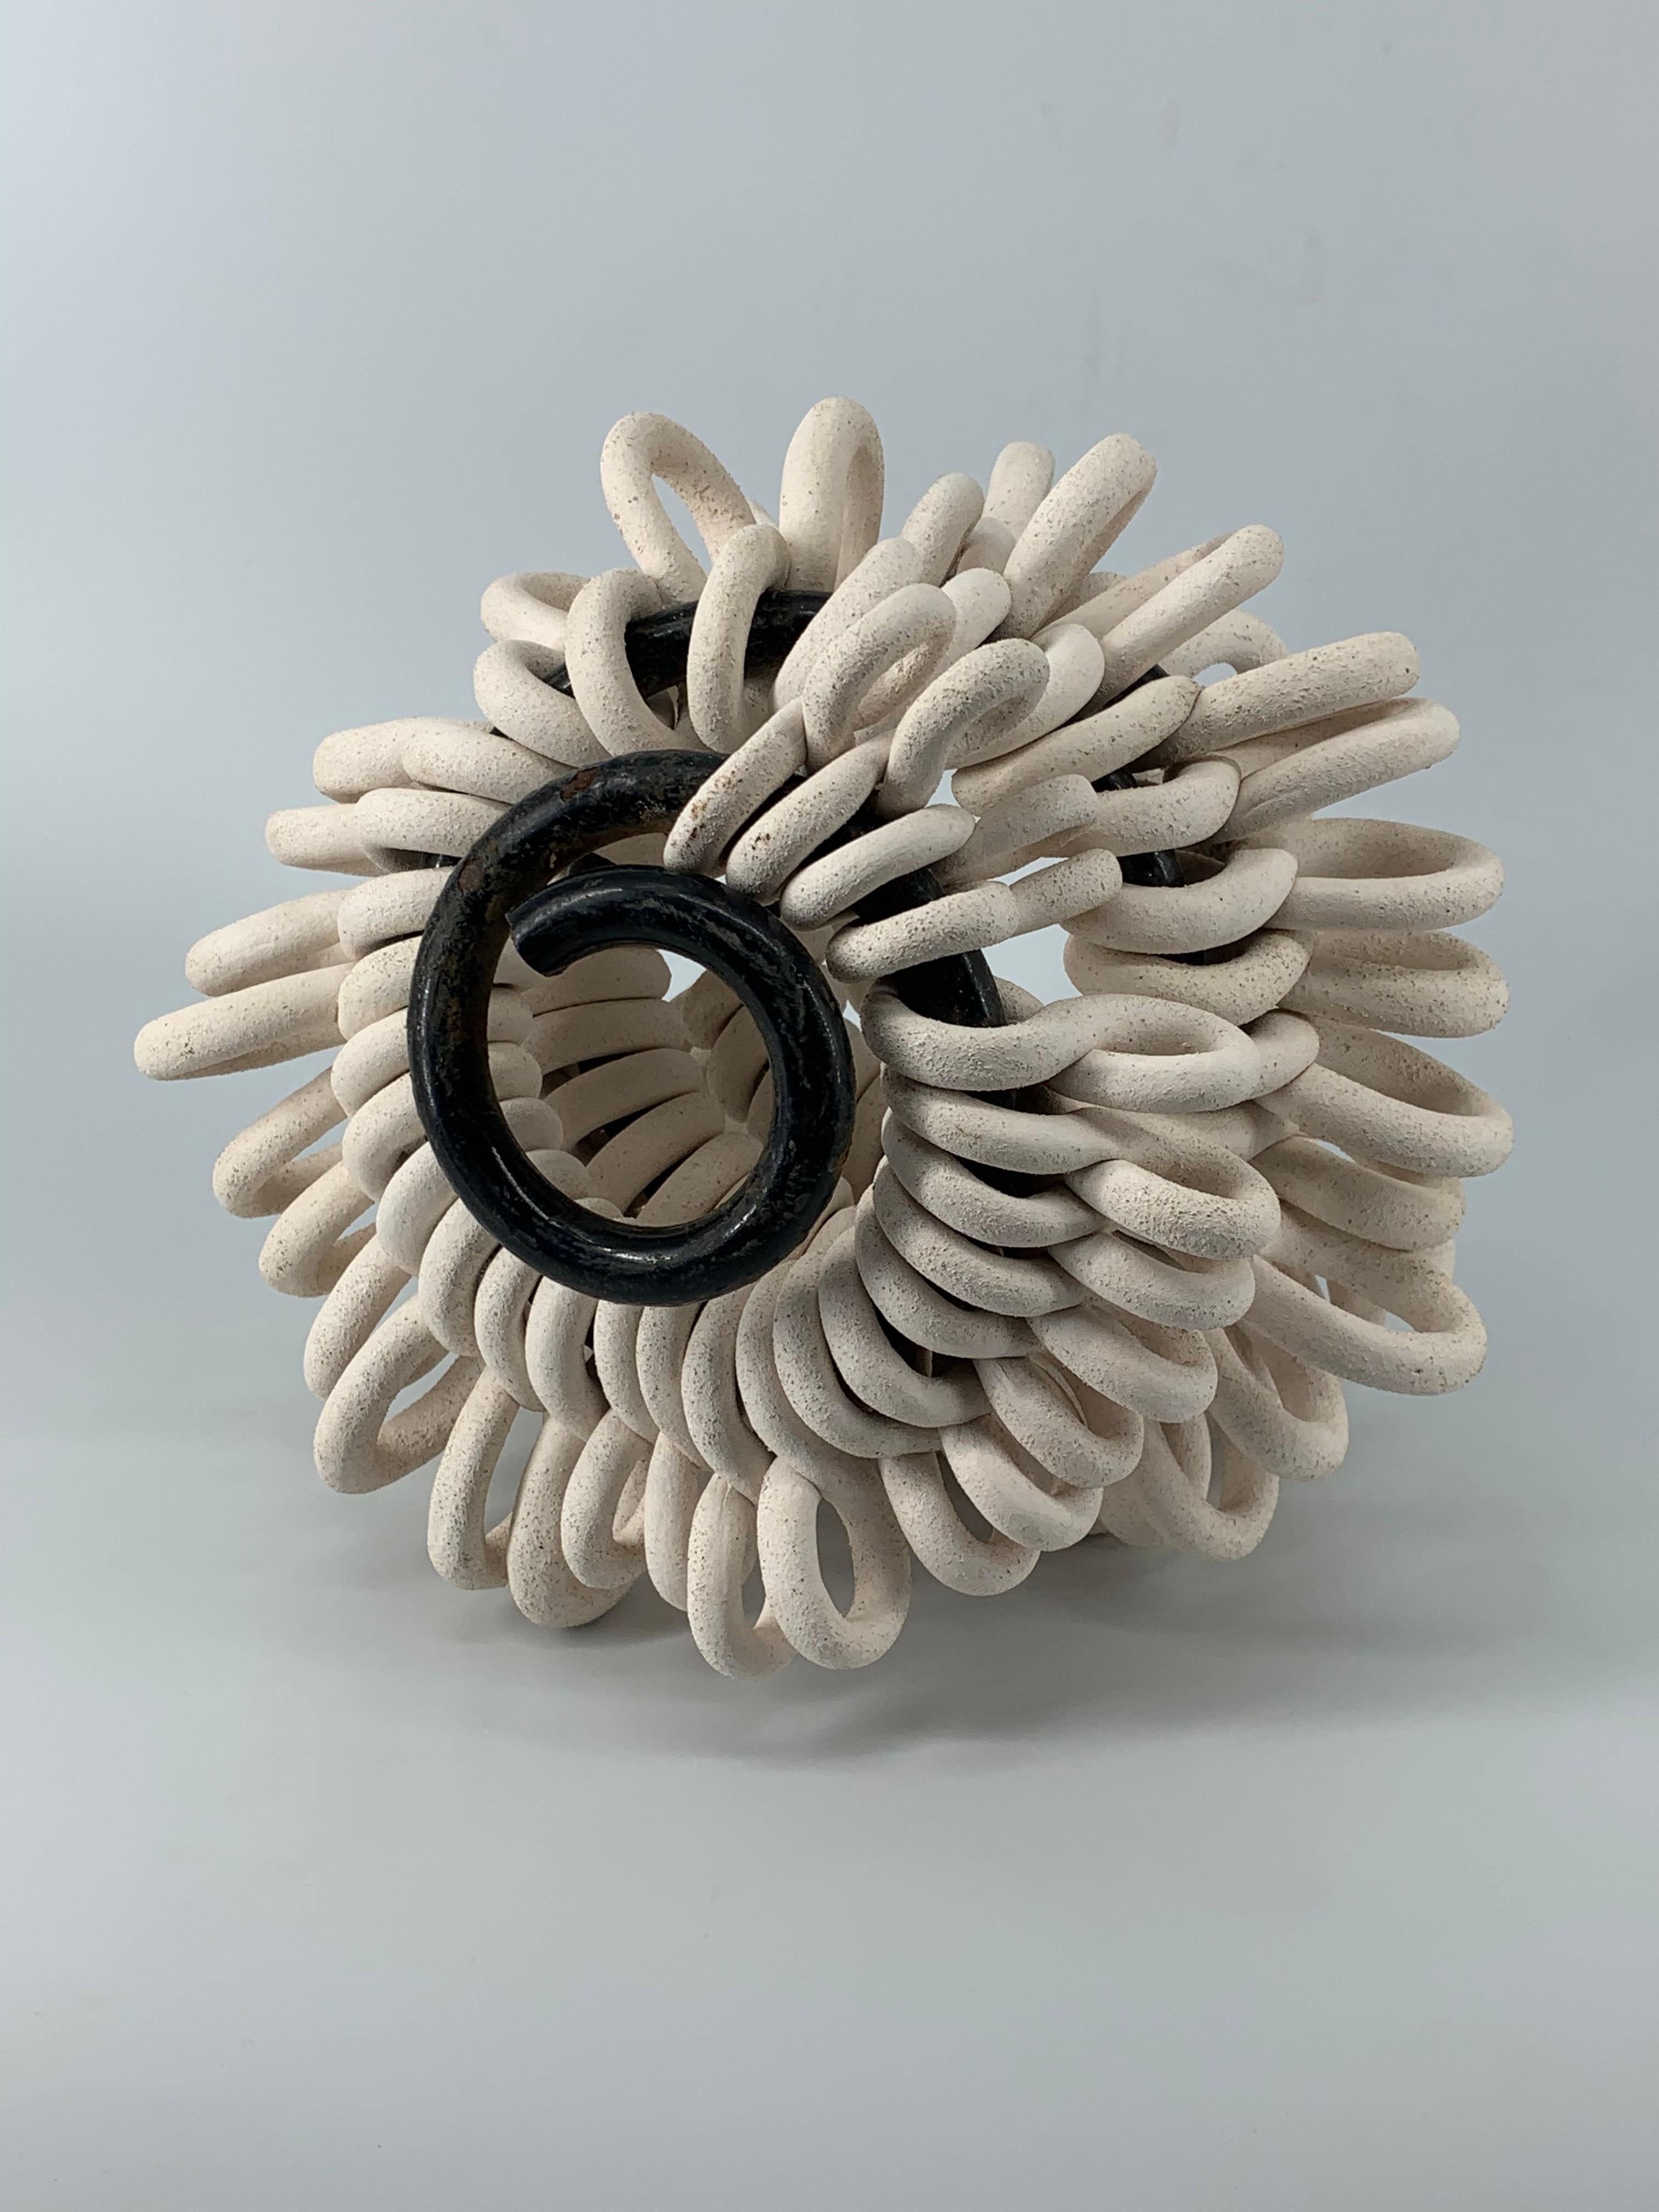 Materials: Chamotte, glazing, metal spring, manual molding

Transformer,The series presents a symbol of spiral and infinity, consisting of many ceramic symbols of infinity. It is a symbol of life and death. It is a constant movement of the universe